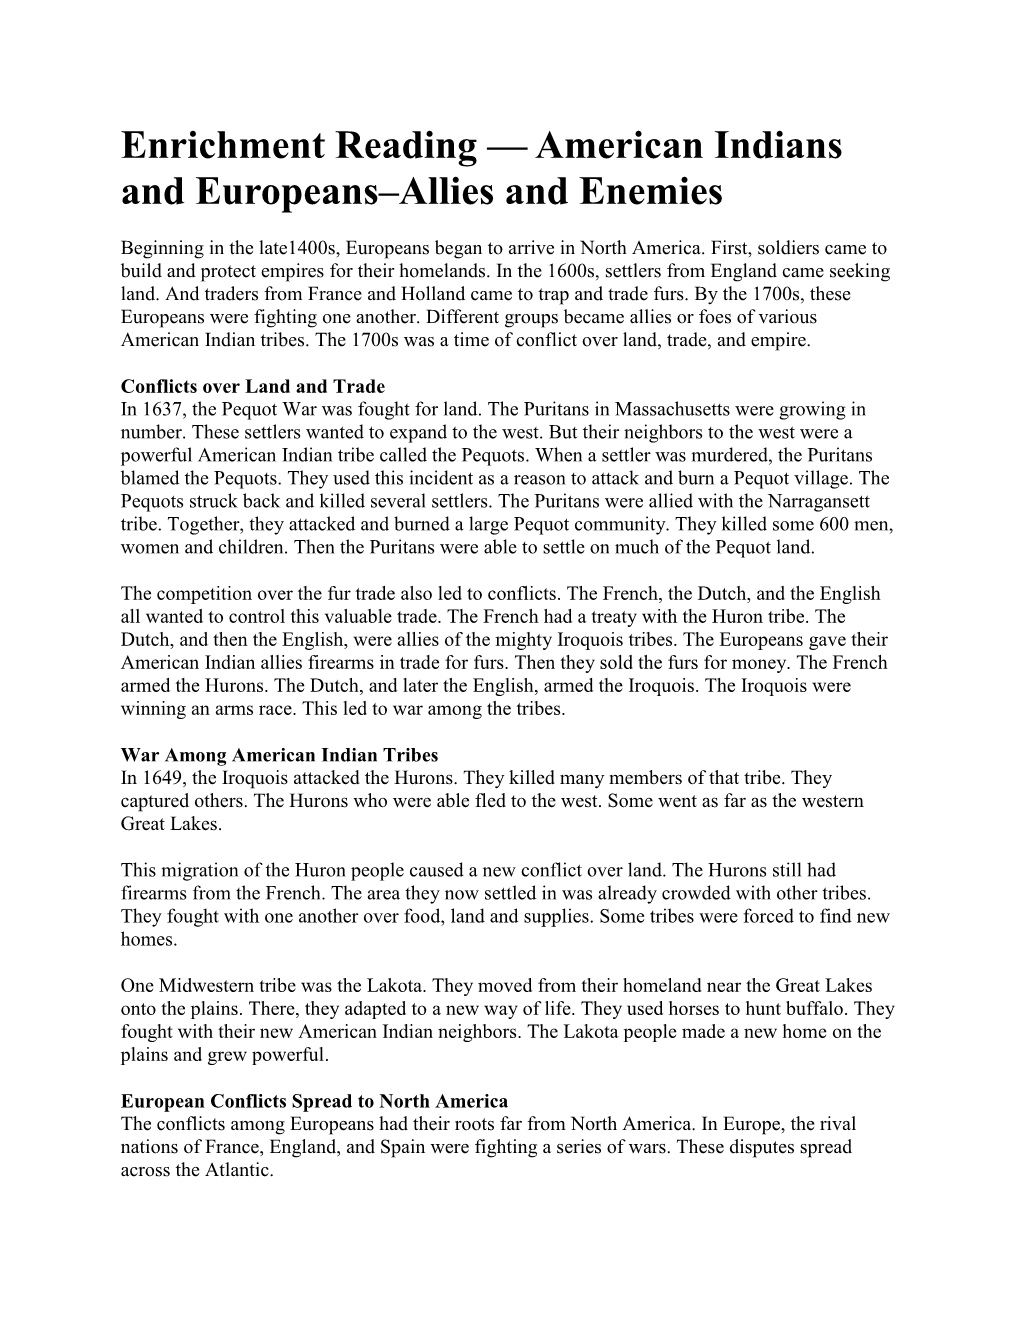 American Indians and Europeans–Allies and Enemies